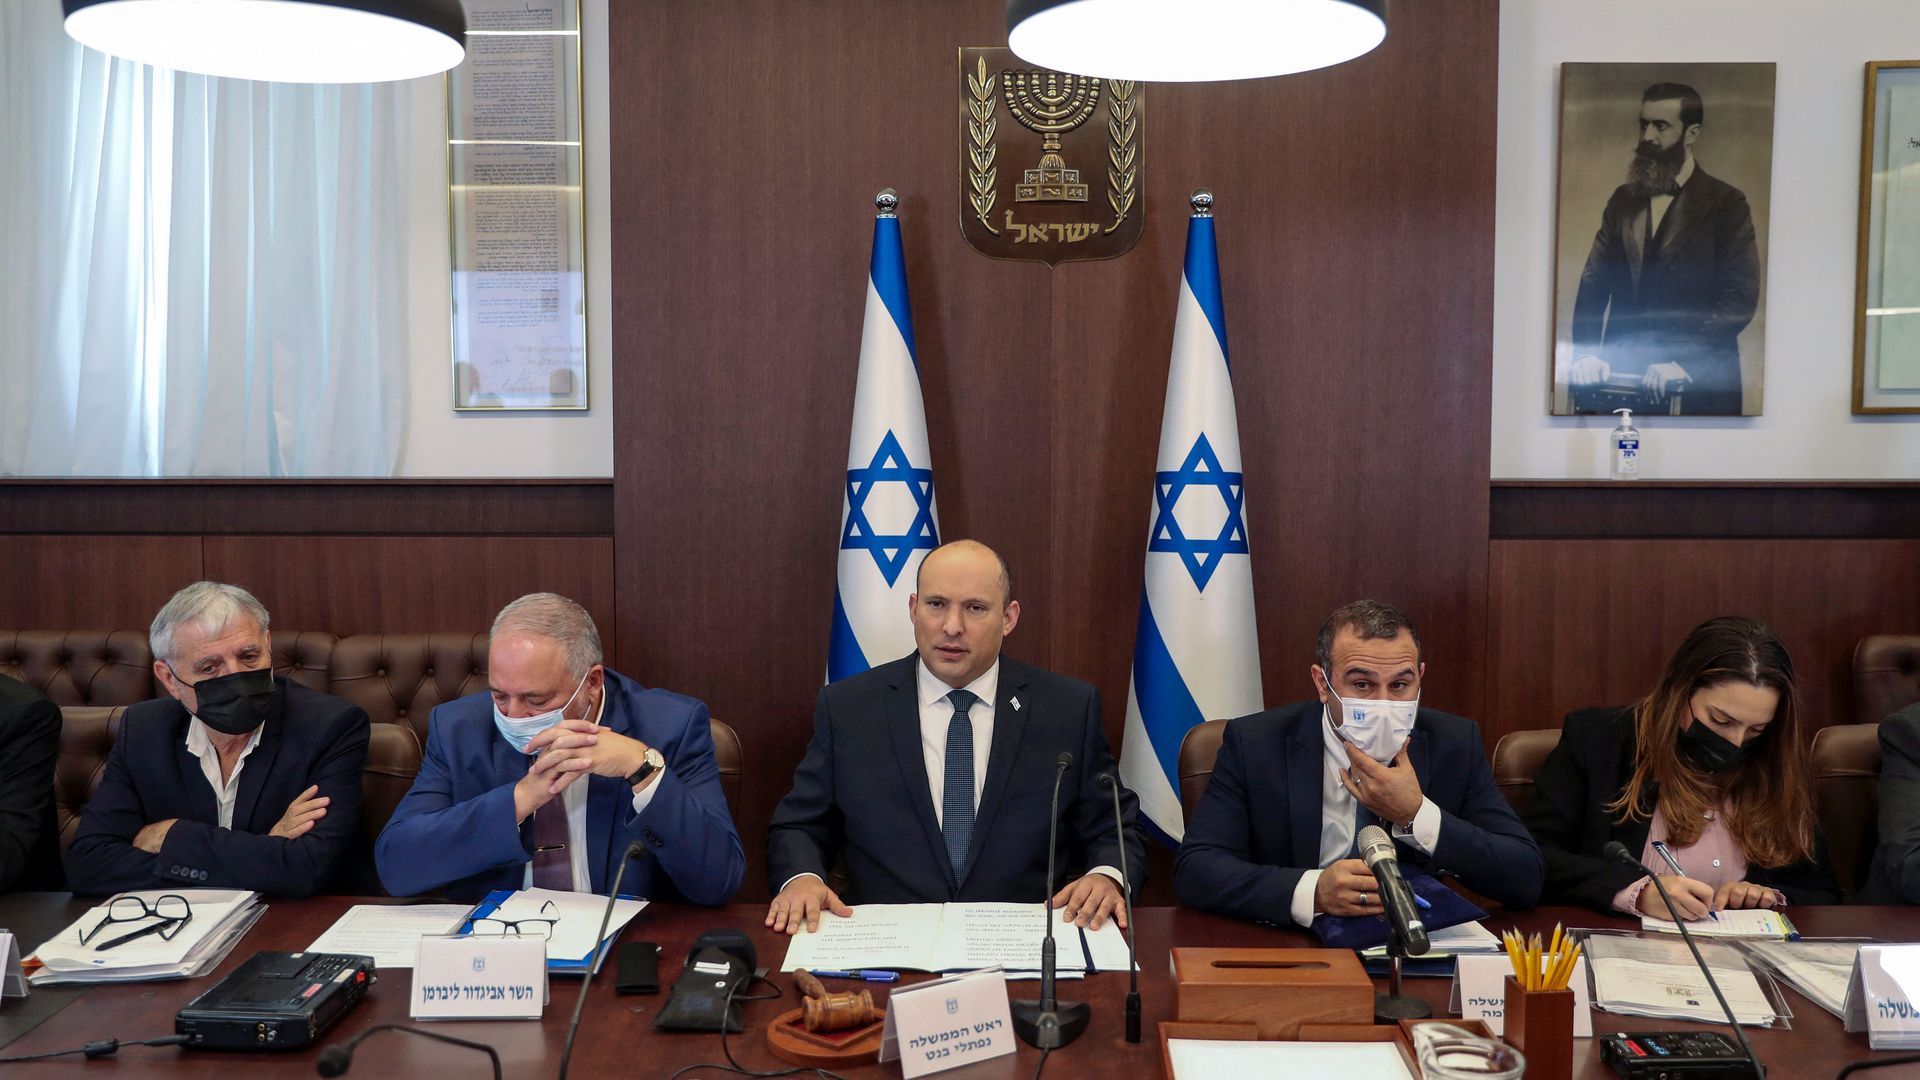 Photo of Naftali Bennett (center) sitting at a table with people on his left and right